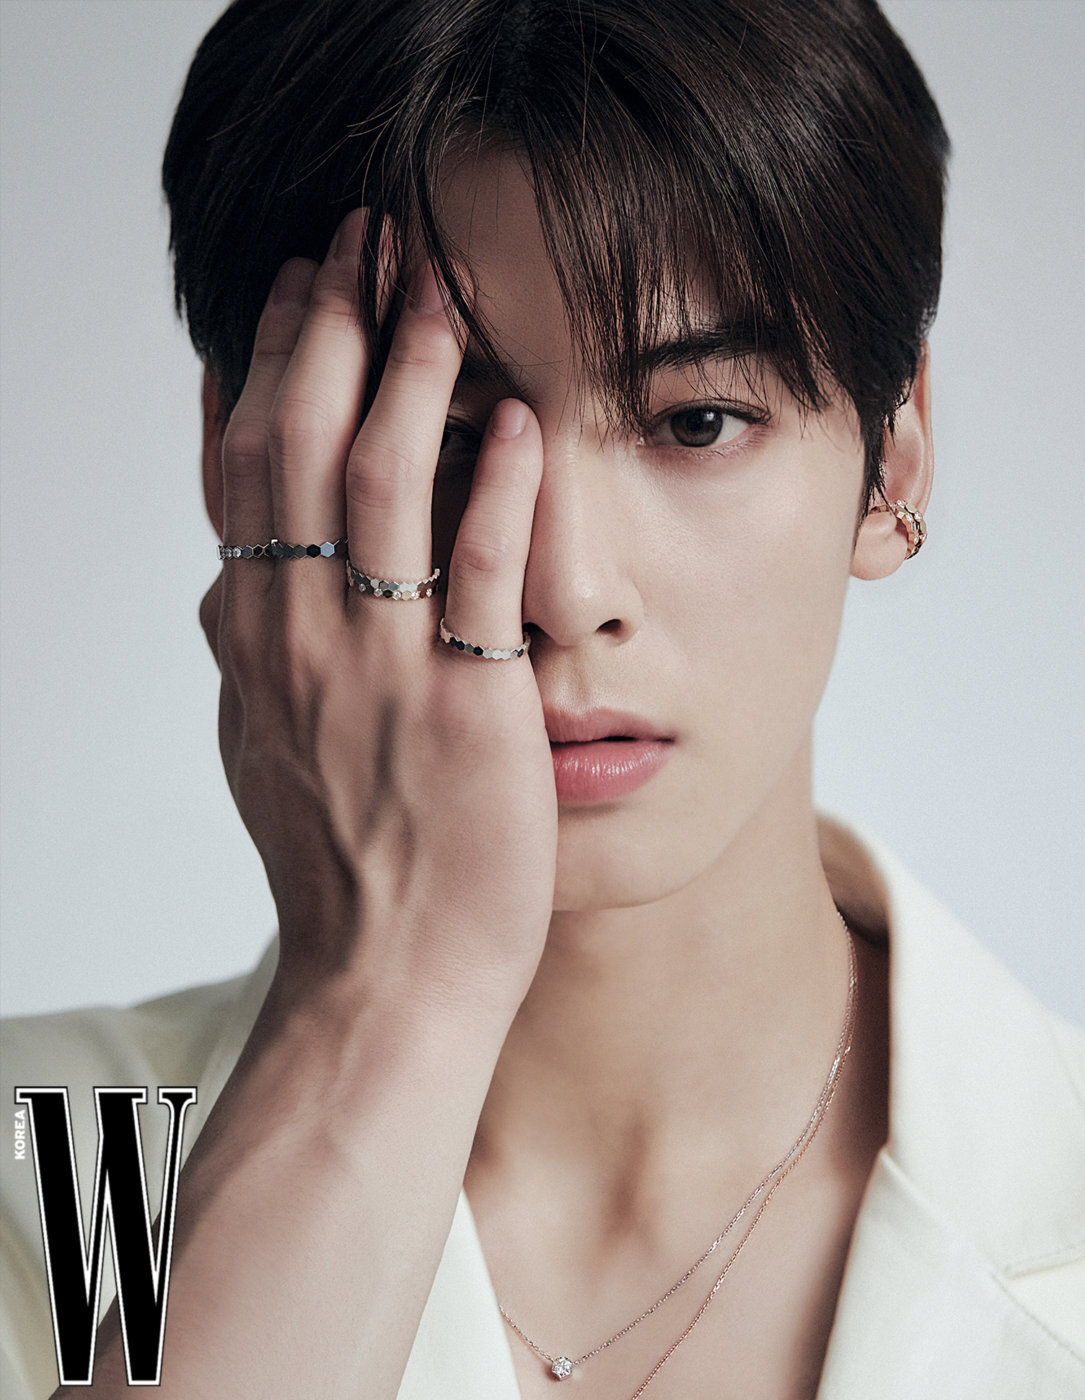 Chaumet unveils Liens 2023 Campaign starring Cha Eun Woo